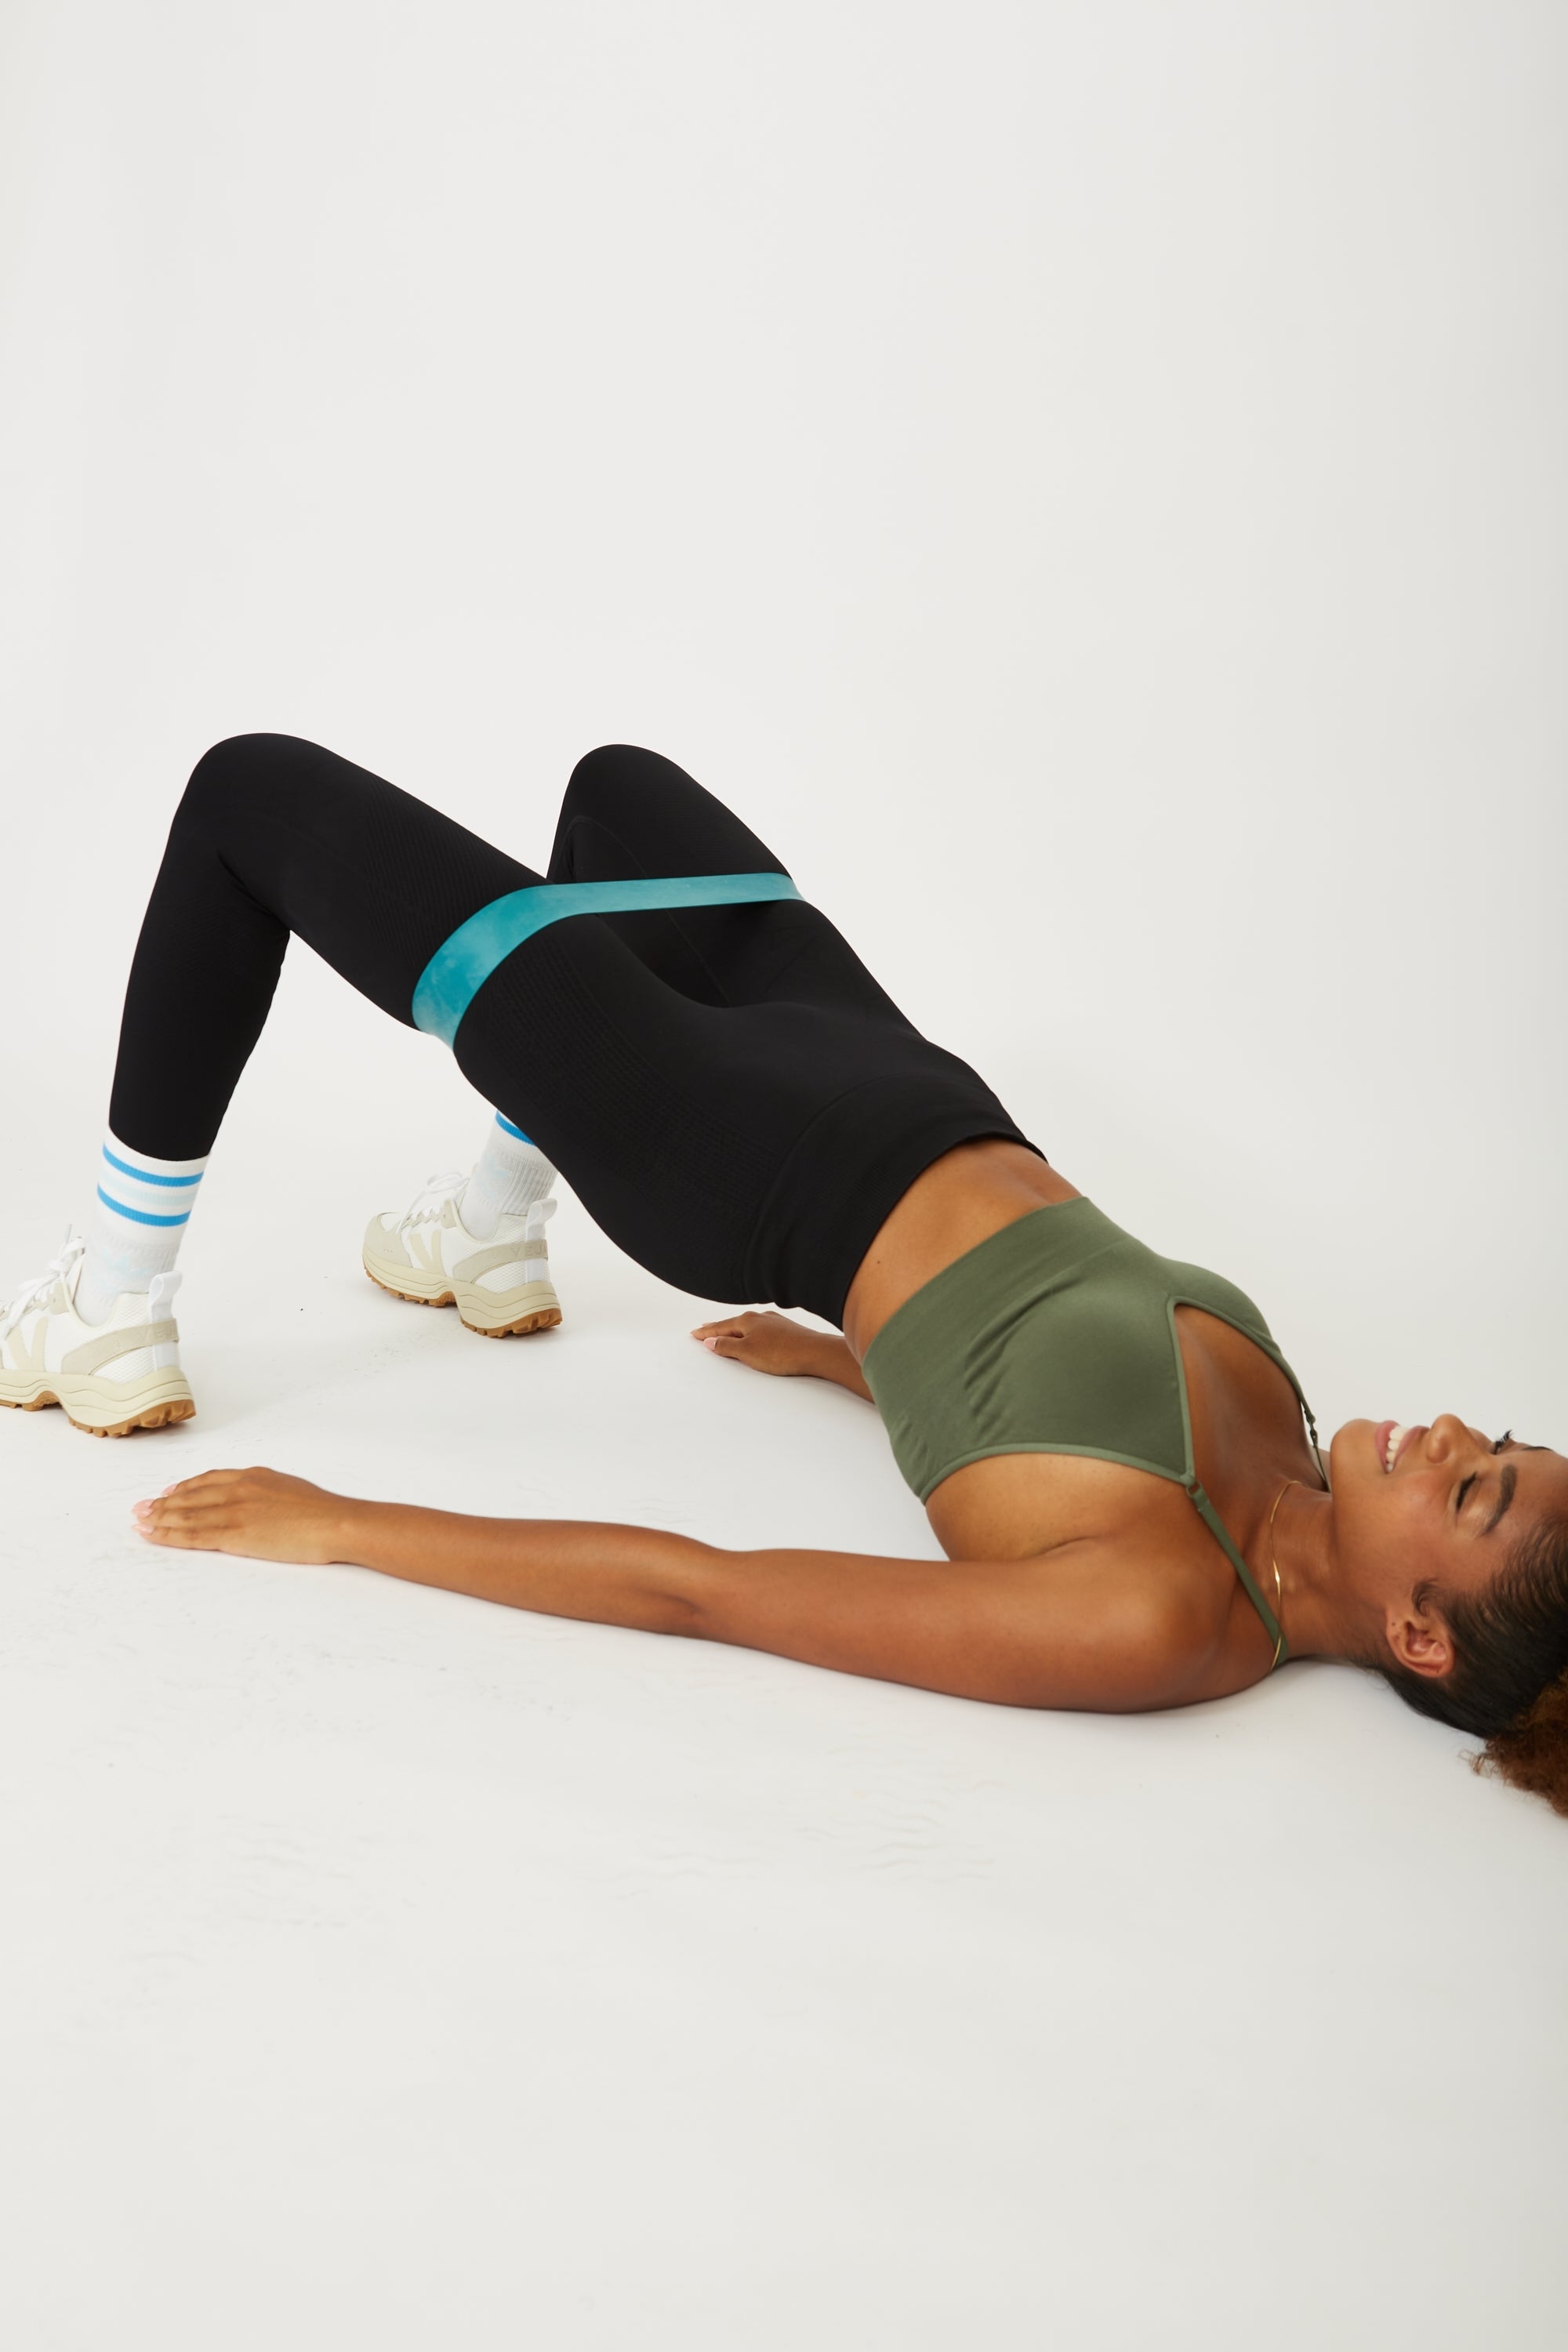 Model wearing black leggings and green supportive sports bra for sustainable activewear brand, Jilla.